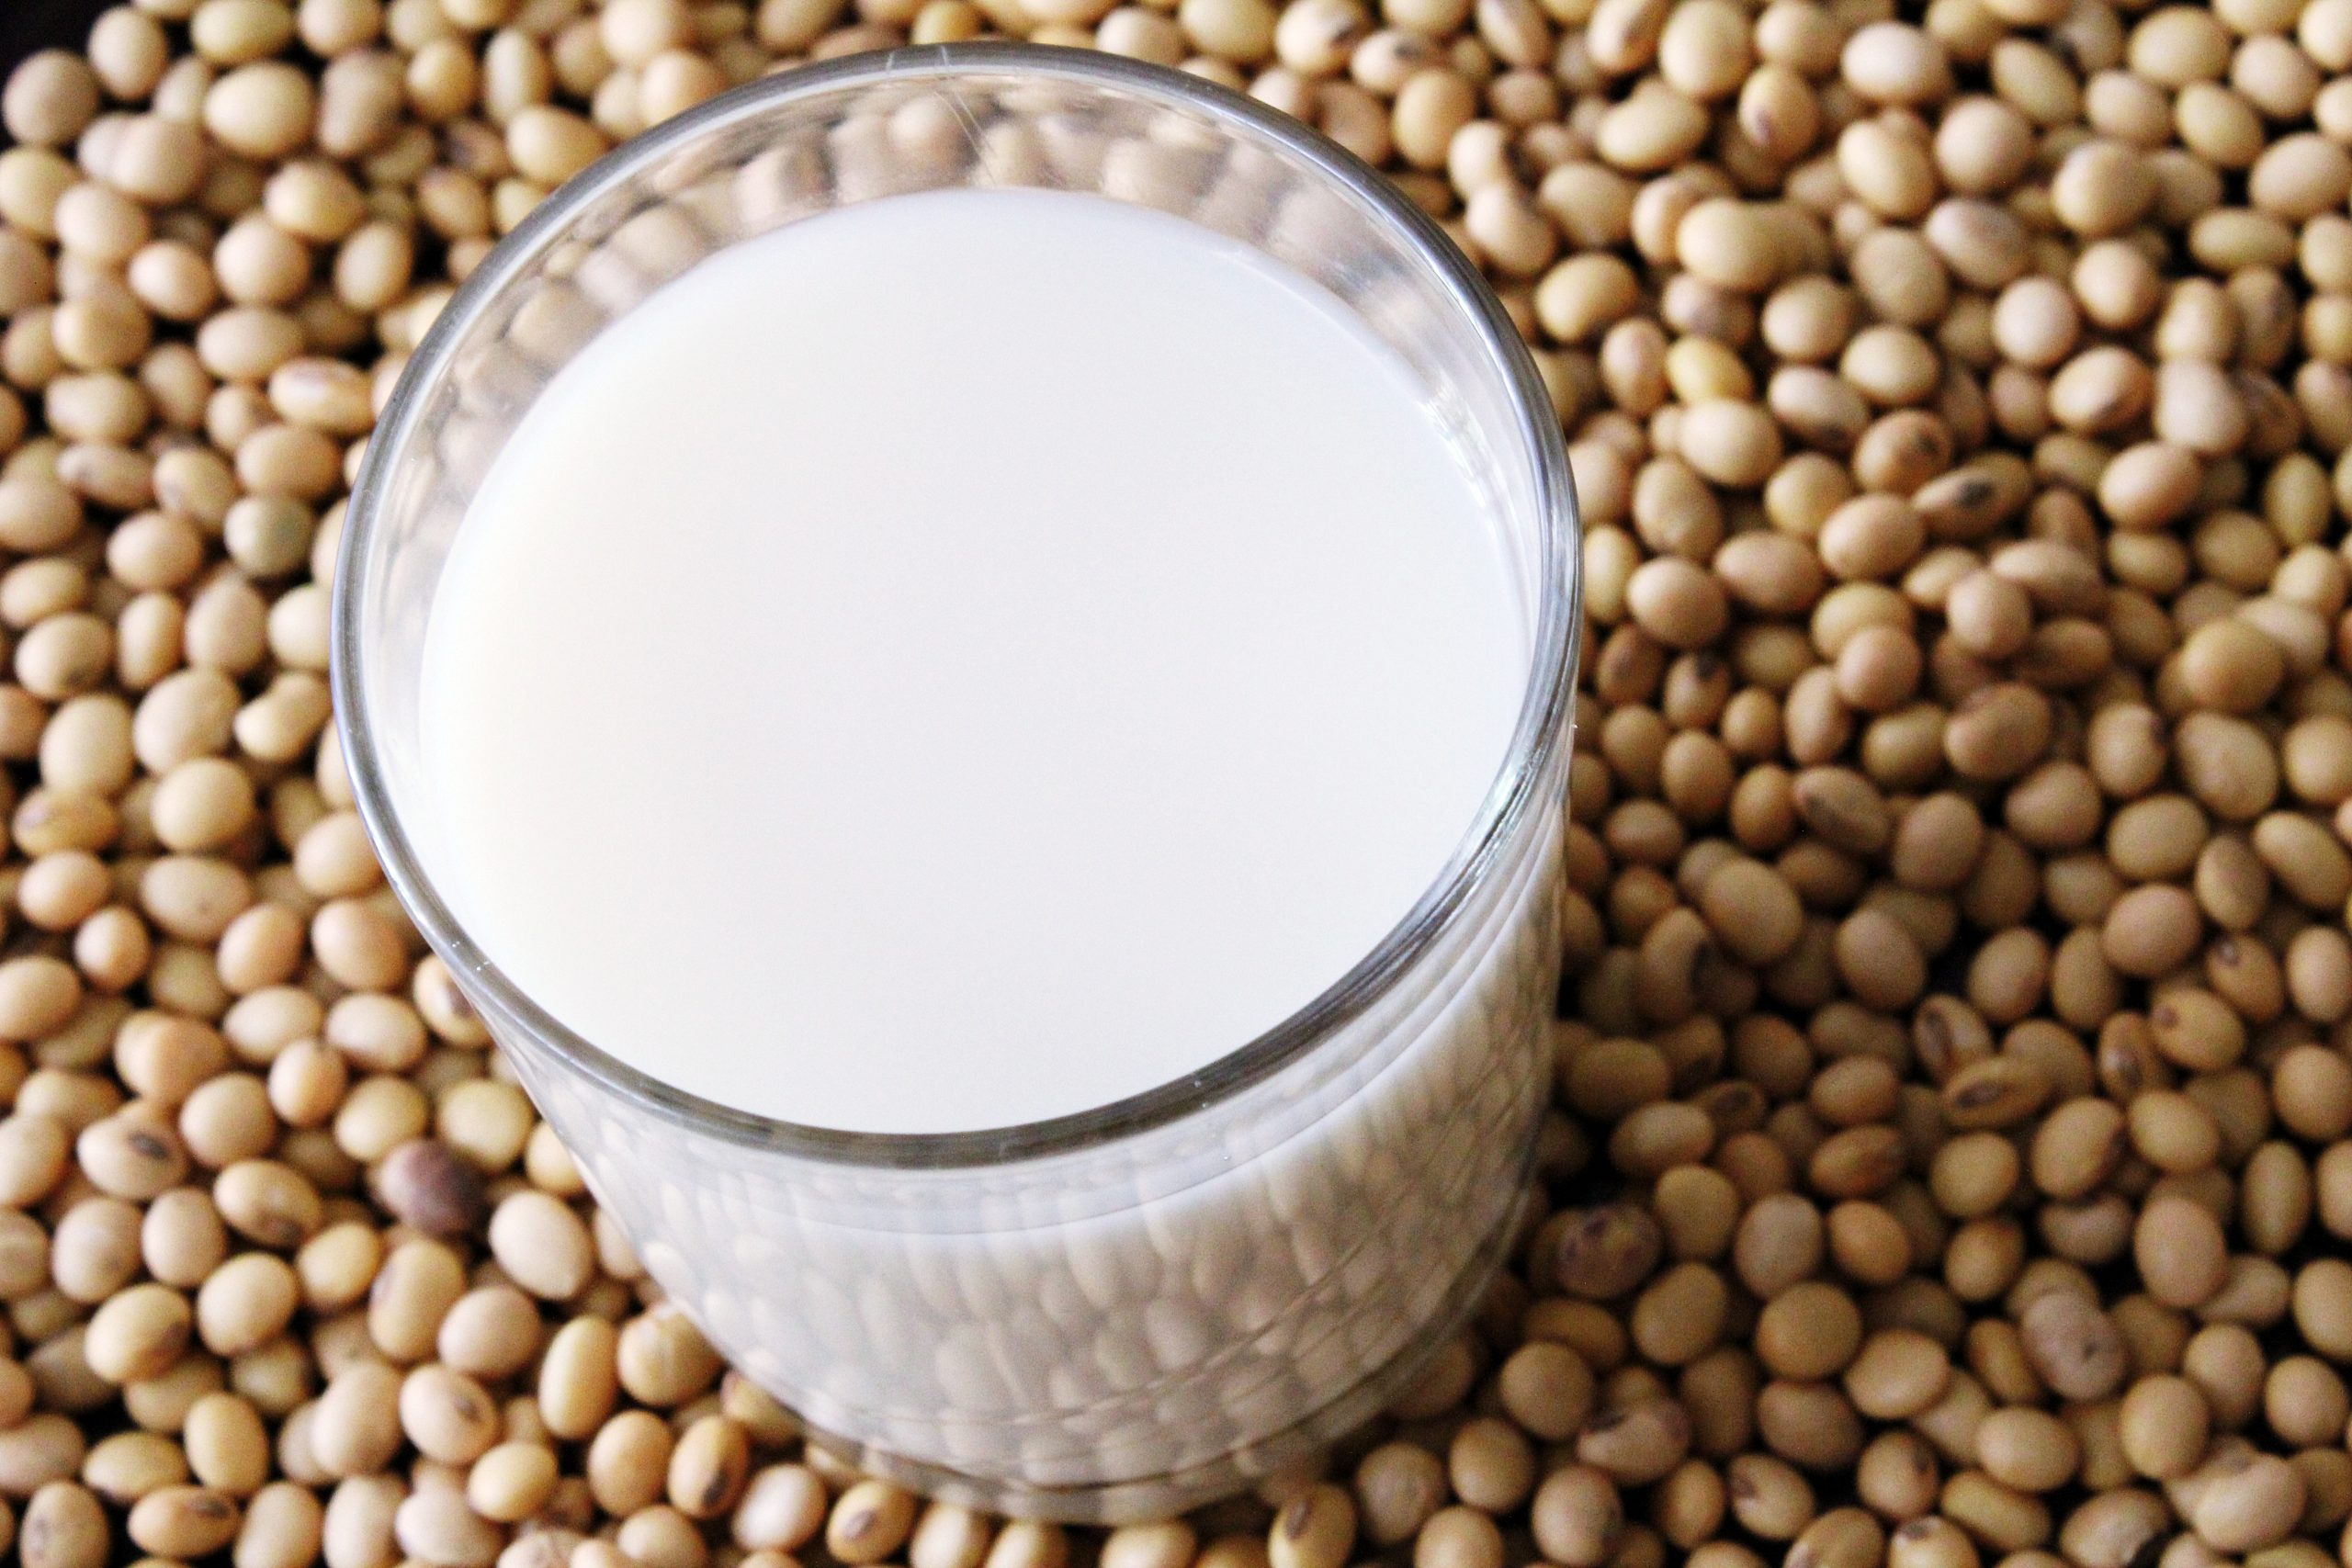 Soy milk is a trigger for Gout